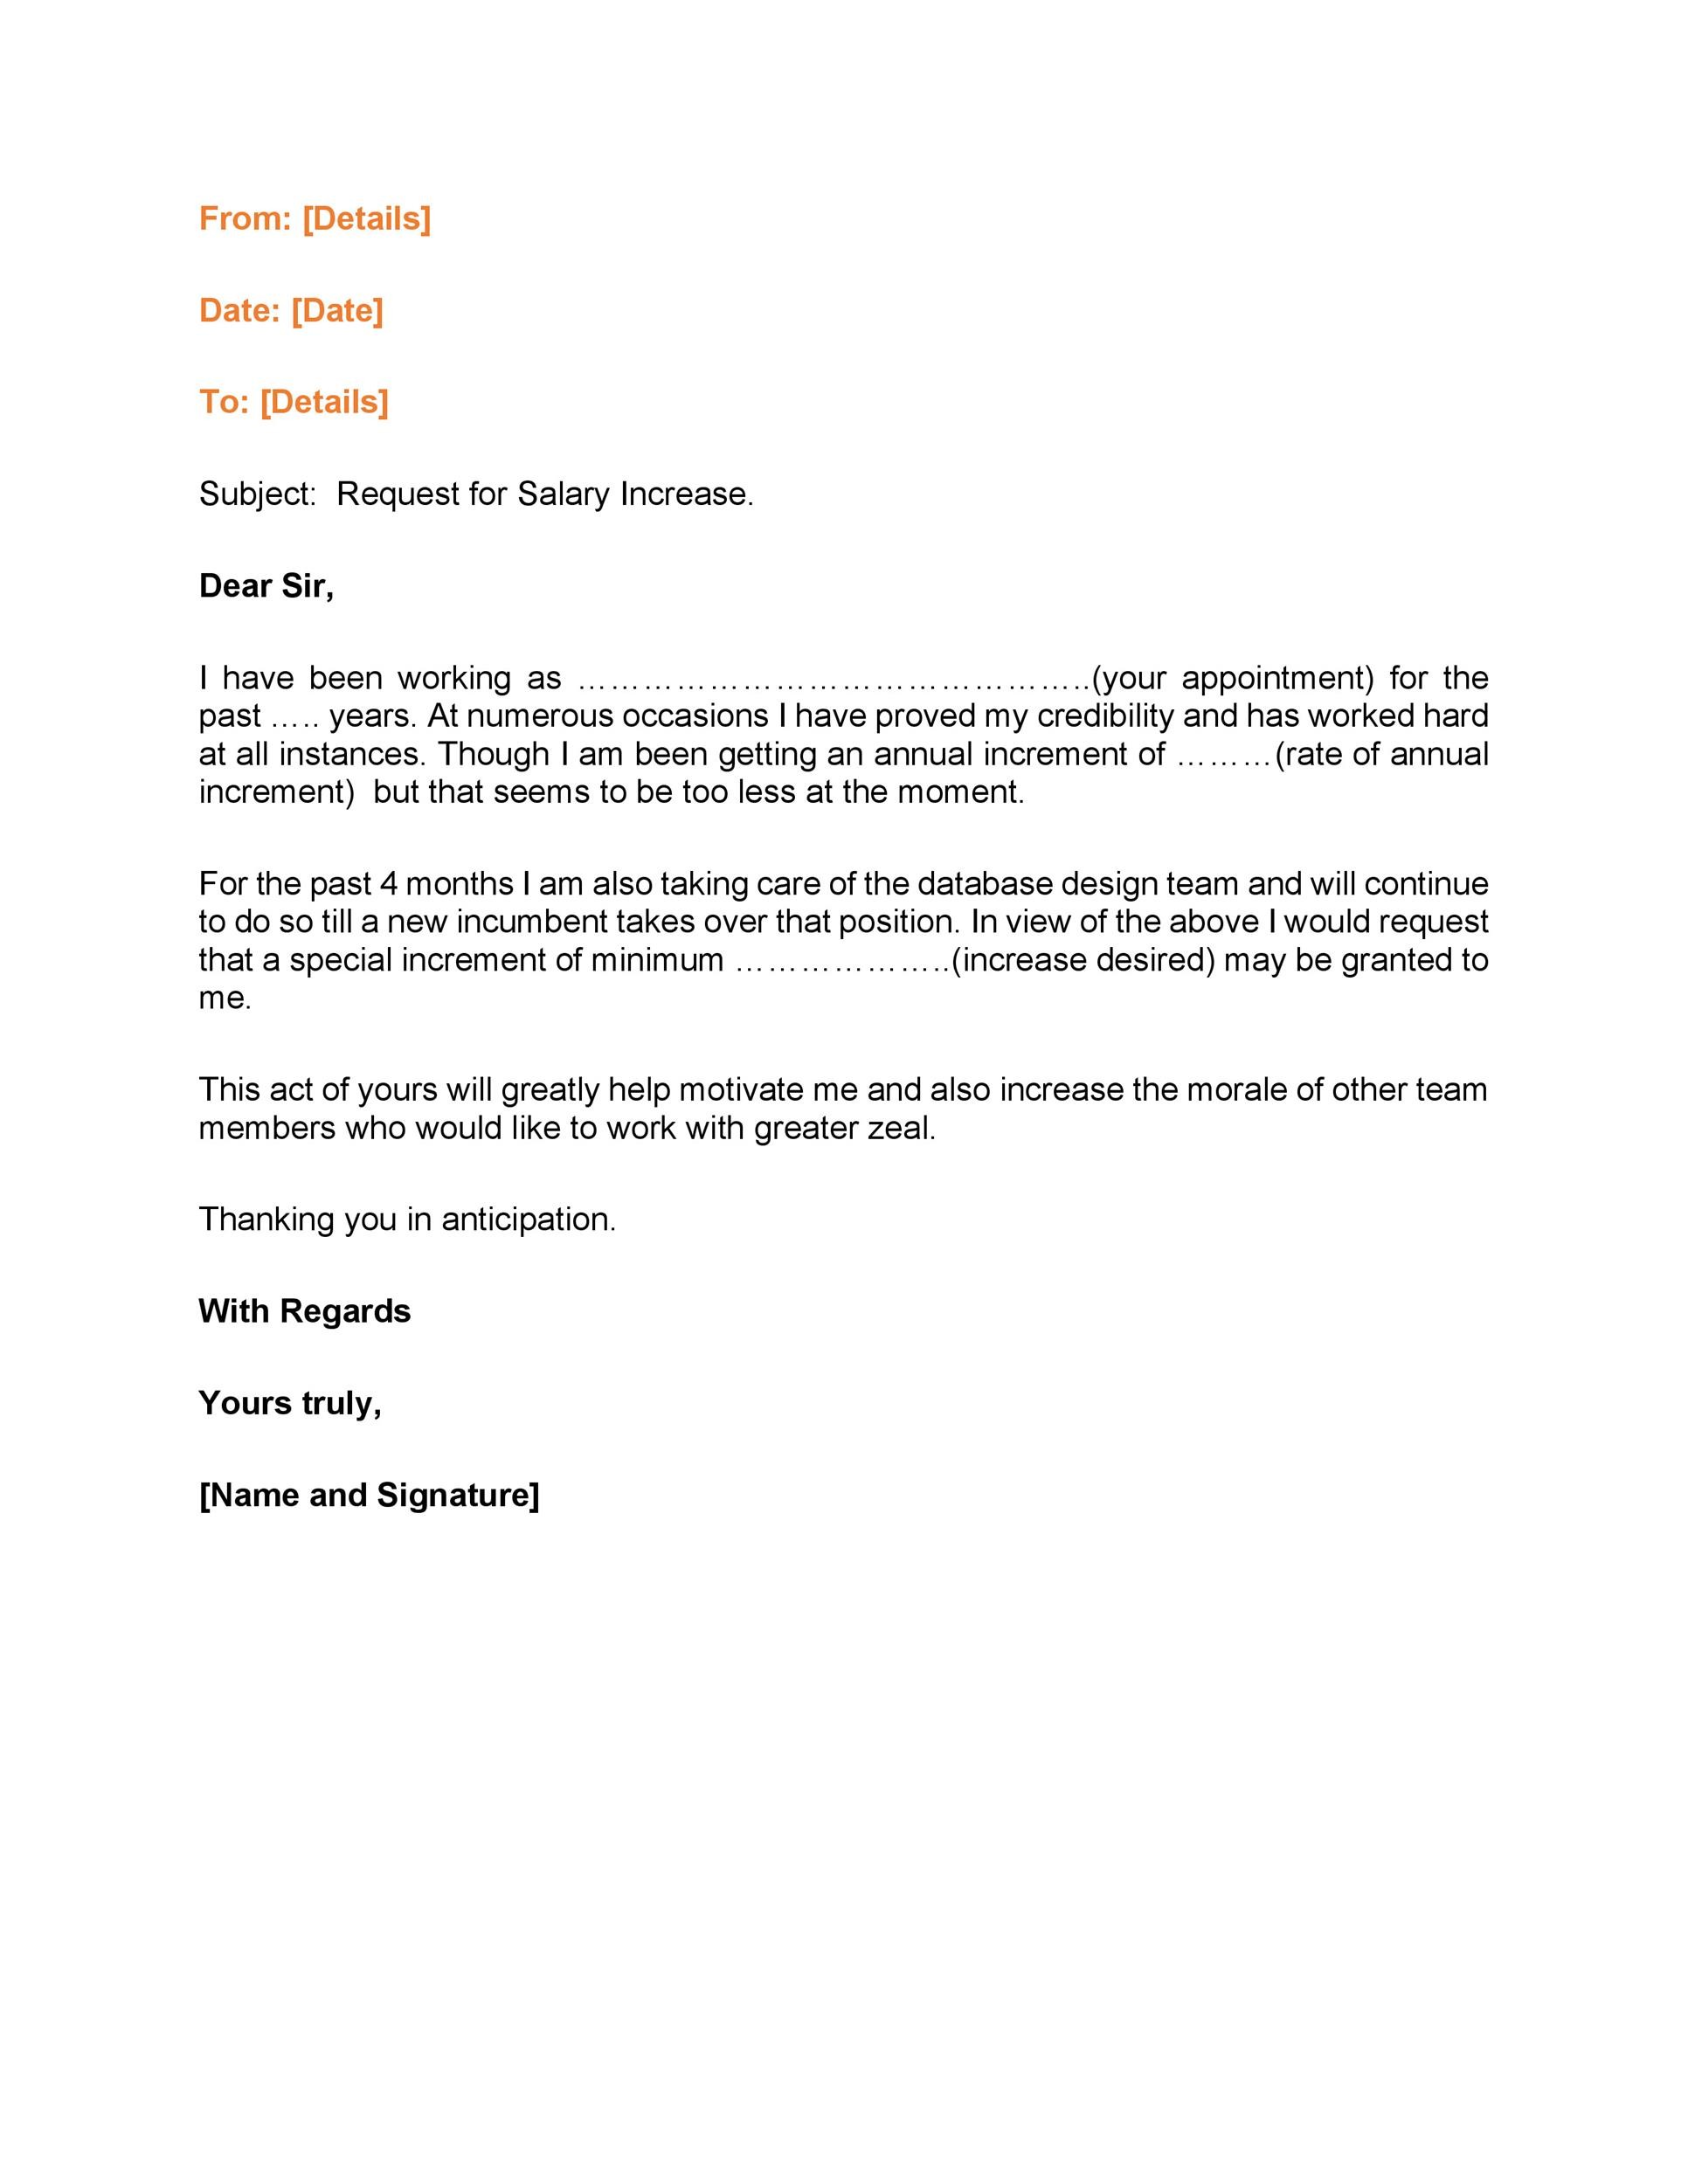 Free salary increase letter 06